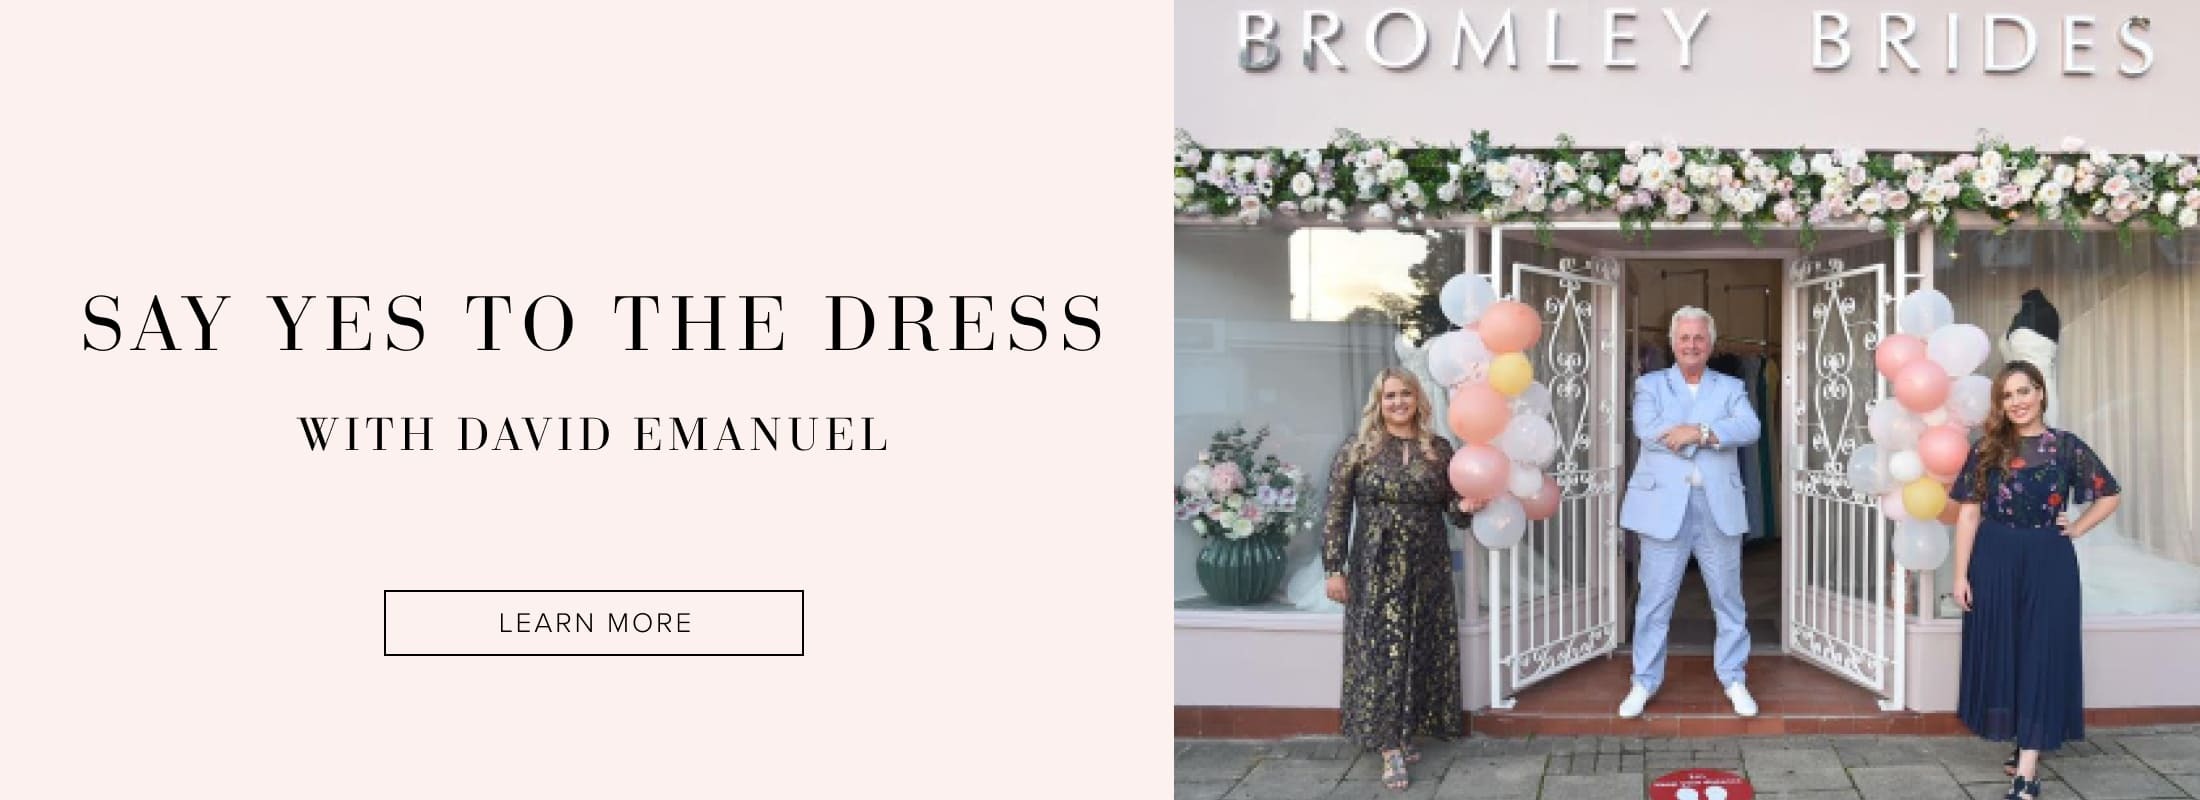 Say yes to the dress with David Emanuel